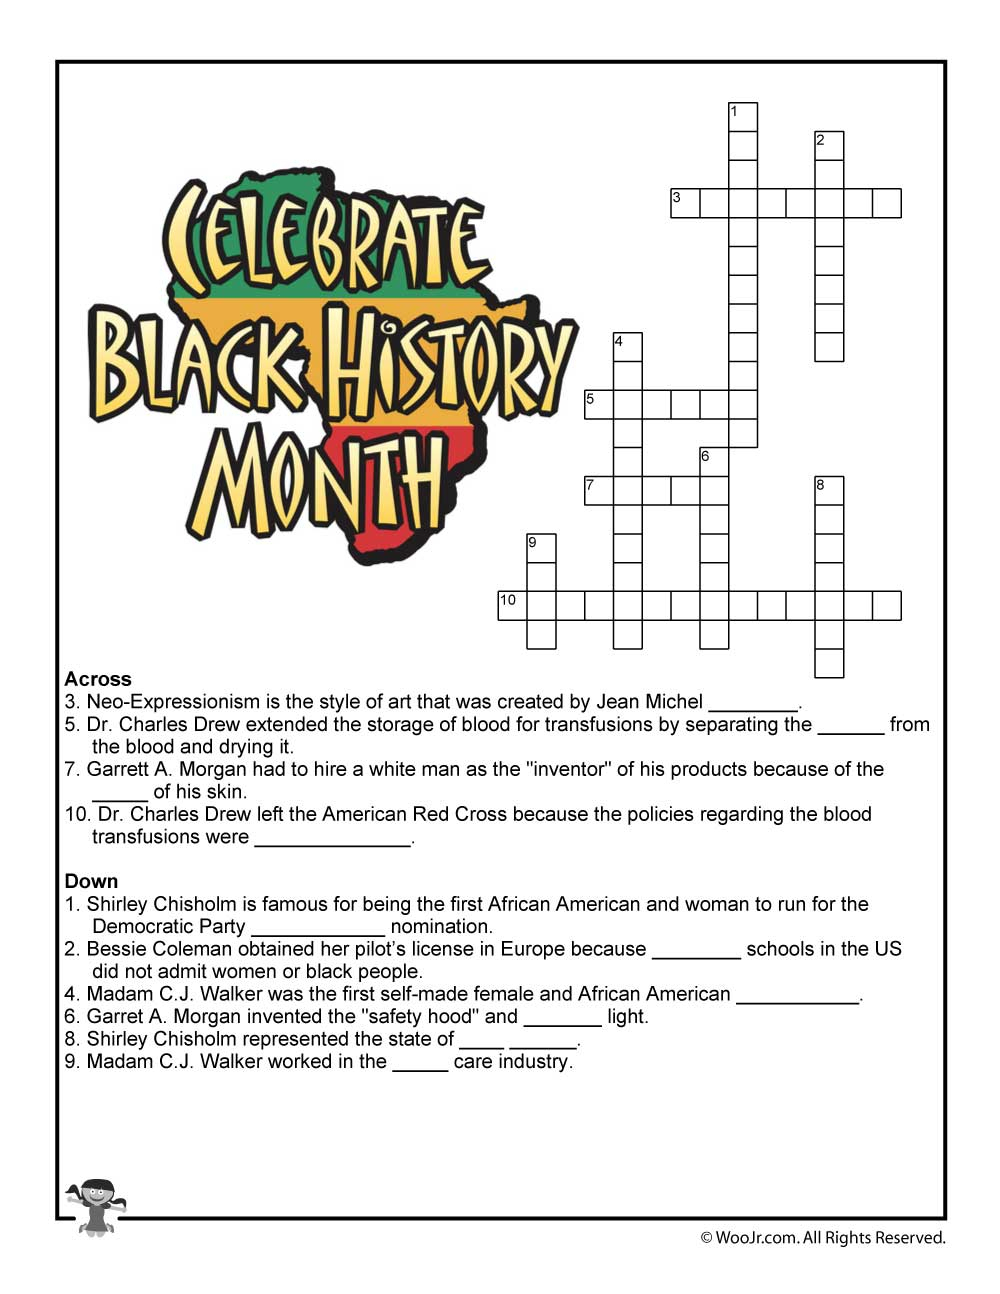 Black History Month For Kids - 6 Amazing African American | Black History Month Free Printable Worksheets